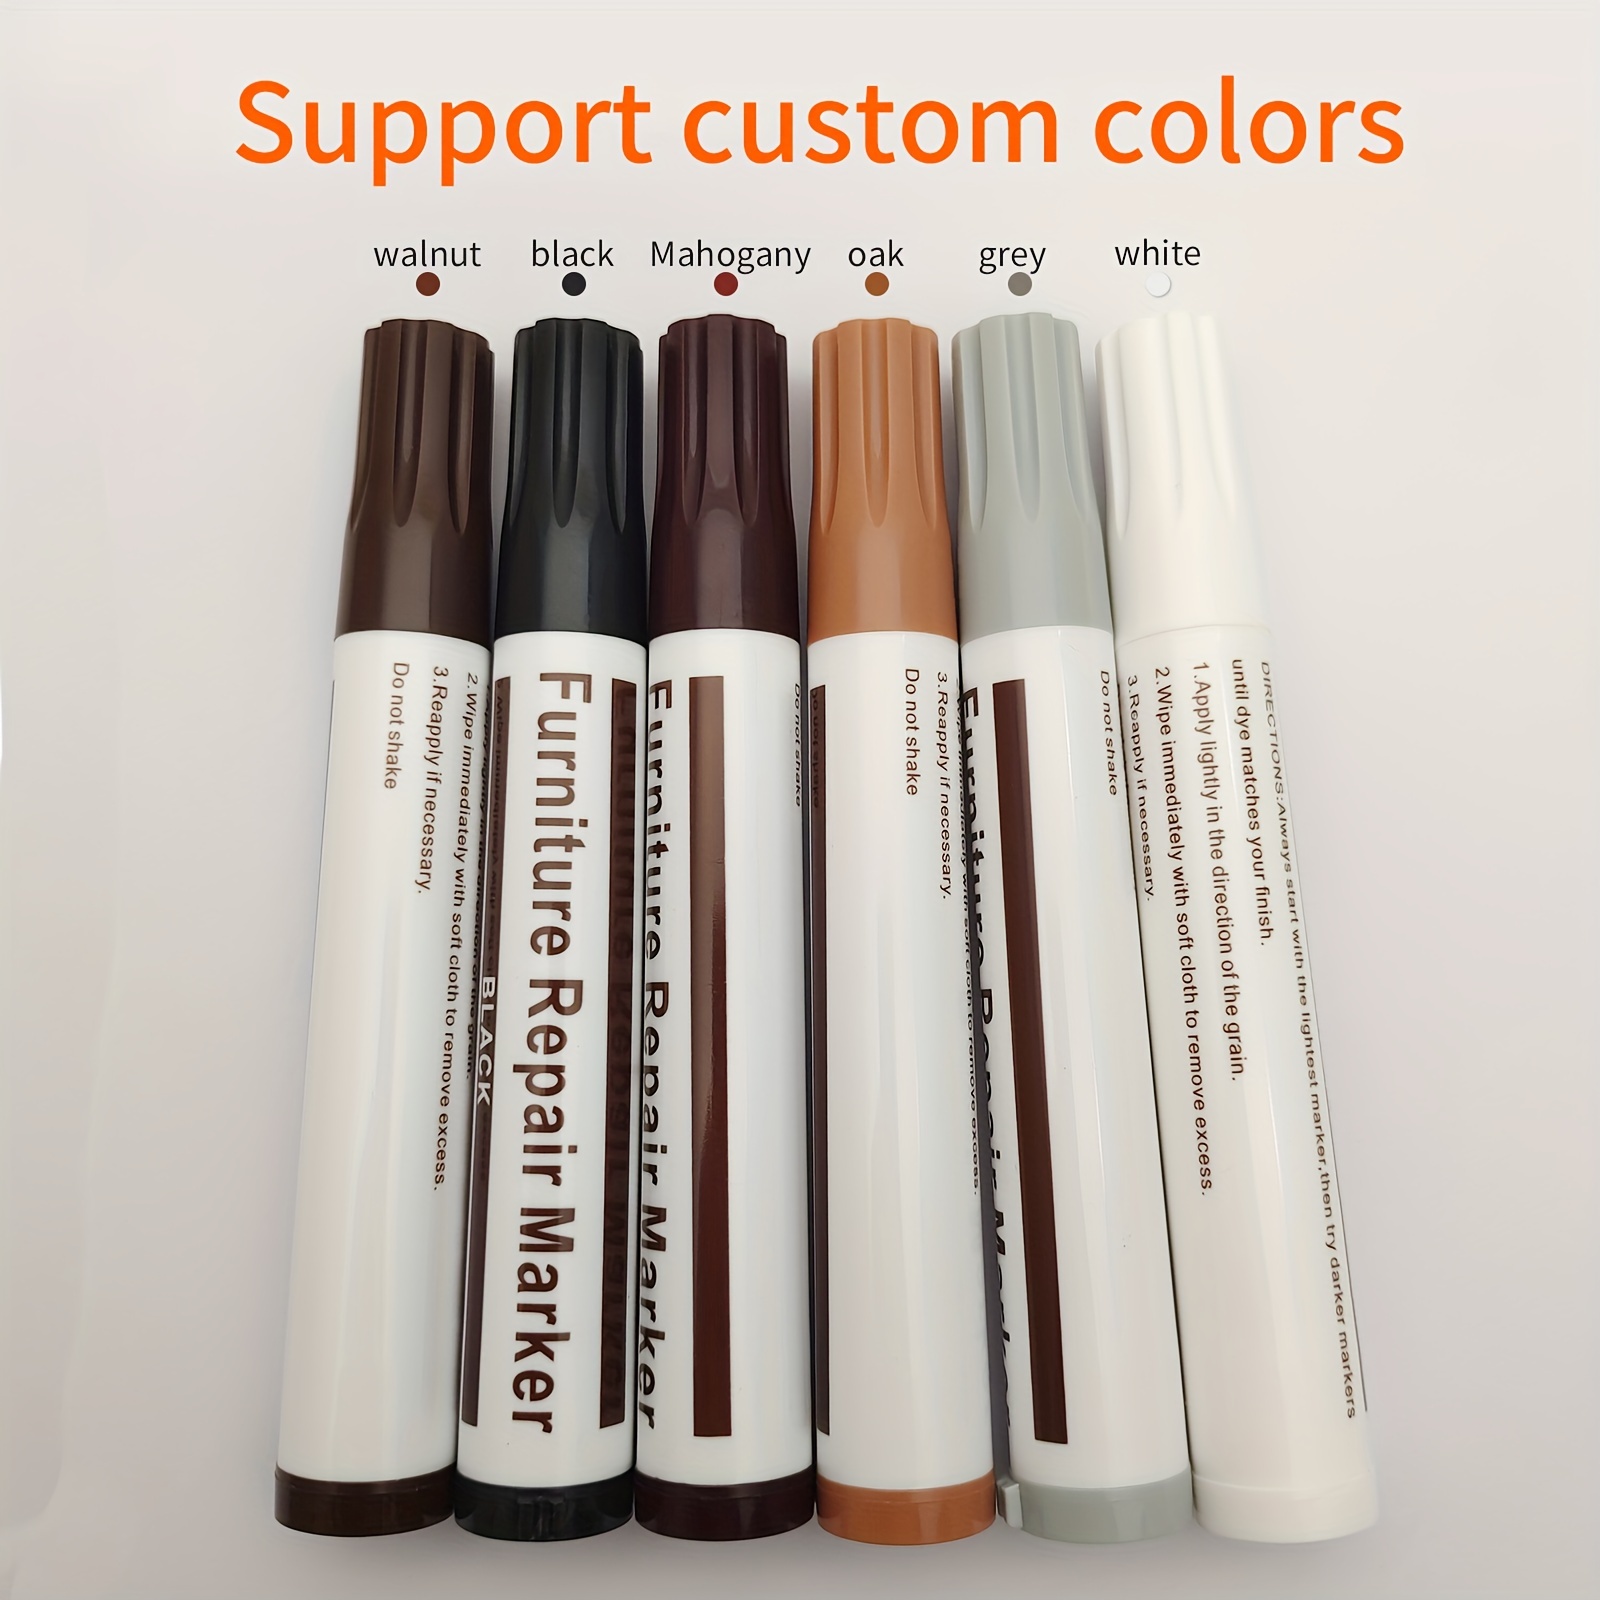 DWIL Touch Up Paint Pen - Touch Up Paint Brushes, Refillable Paint Pen, for  Wall Repair, Funiture, Cabinet, Wood Floor, Window, Scratches, Touch Ups